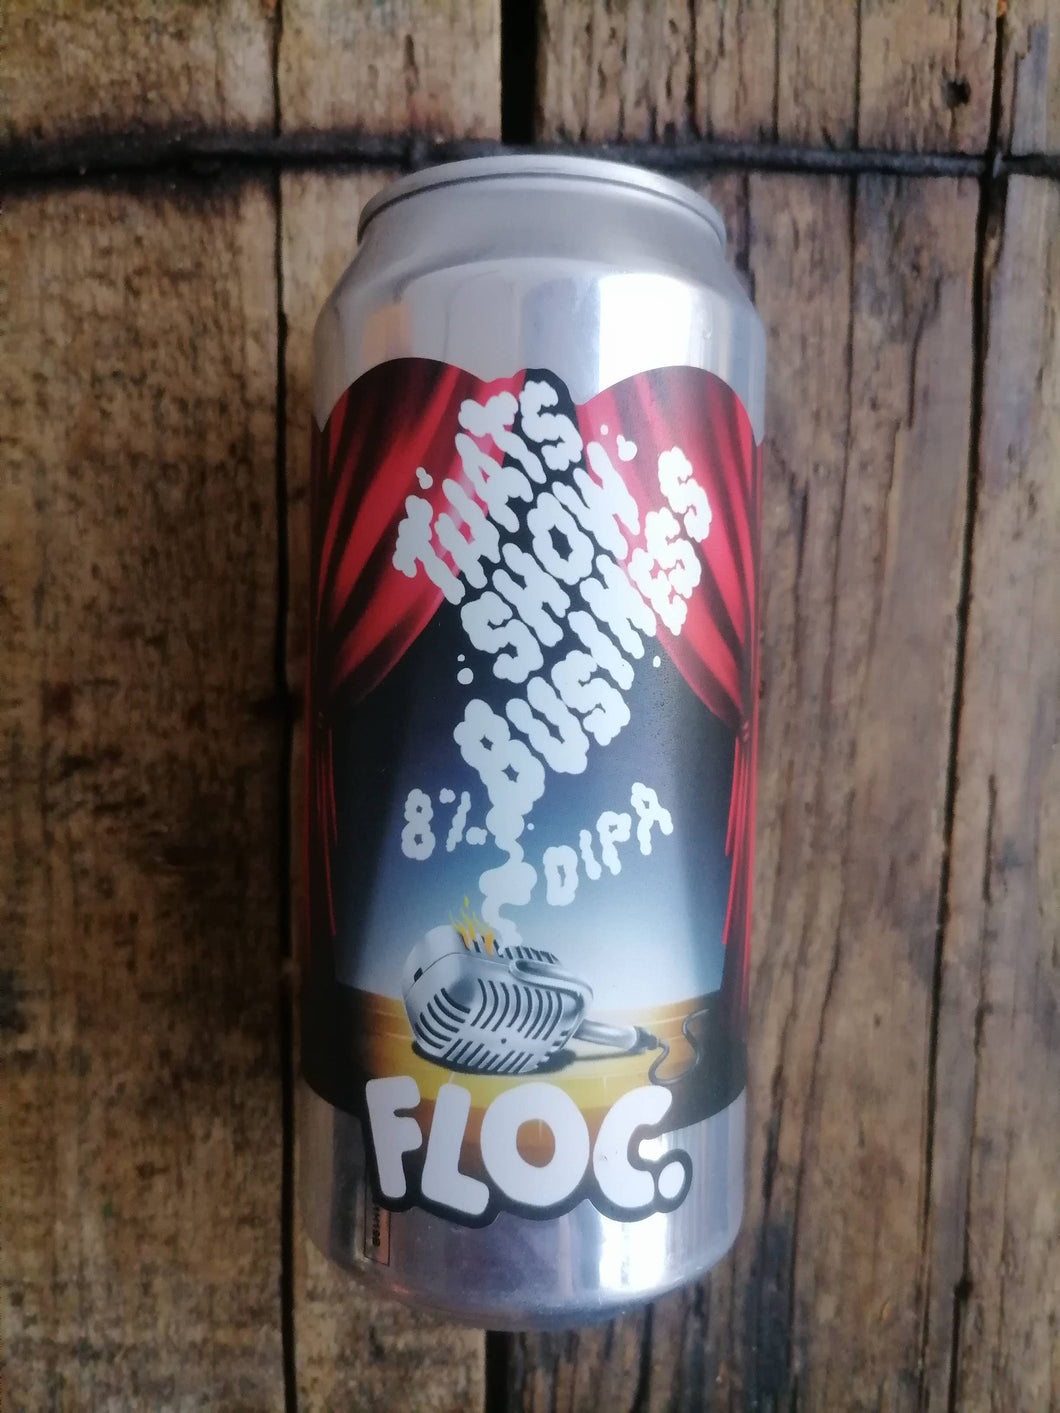 Floc. That's Show Business 8% (440ml can)